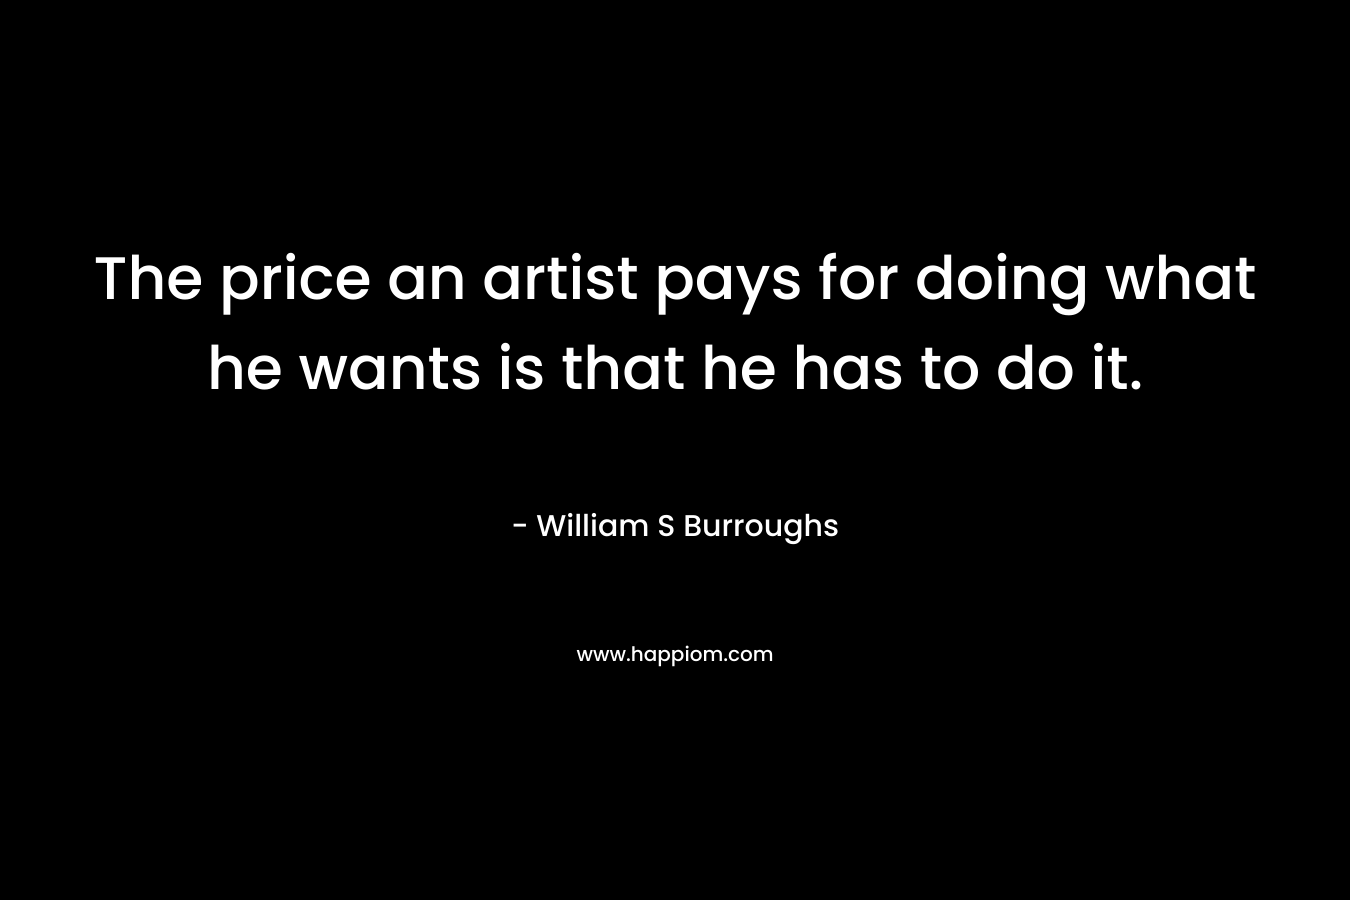 The price an artist pays for doing what he wants is that he has to do it.